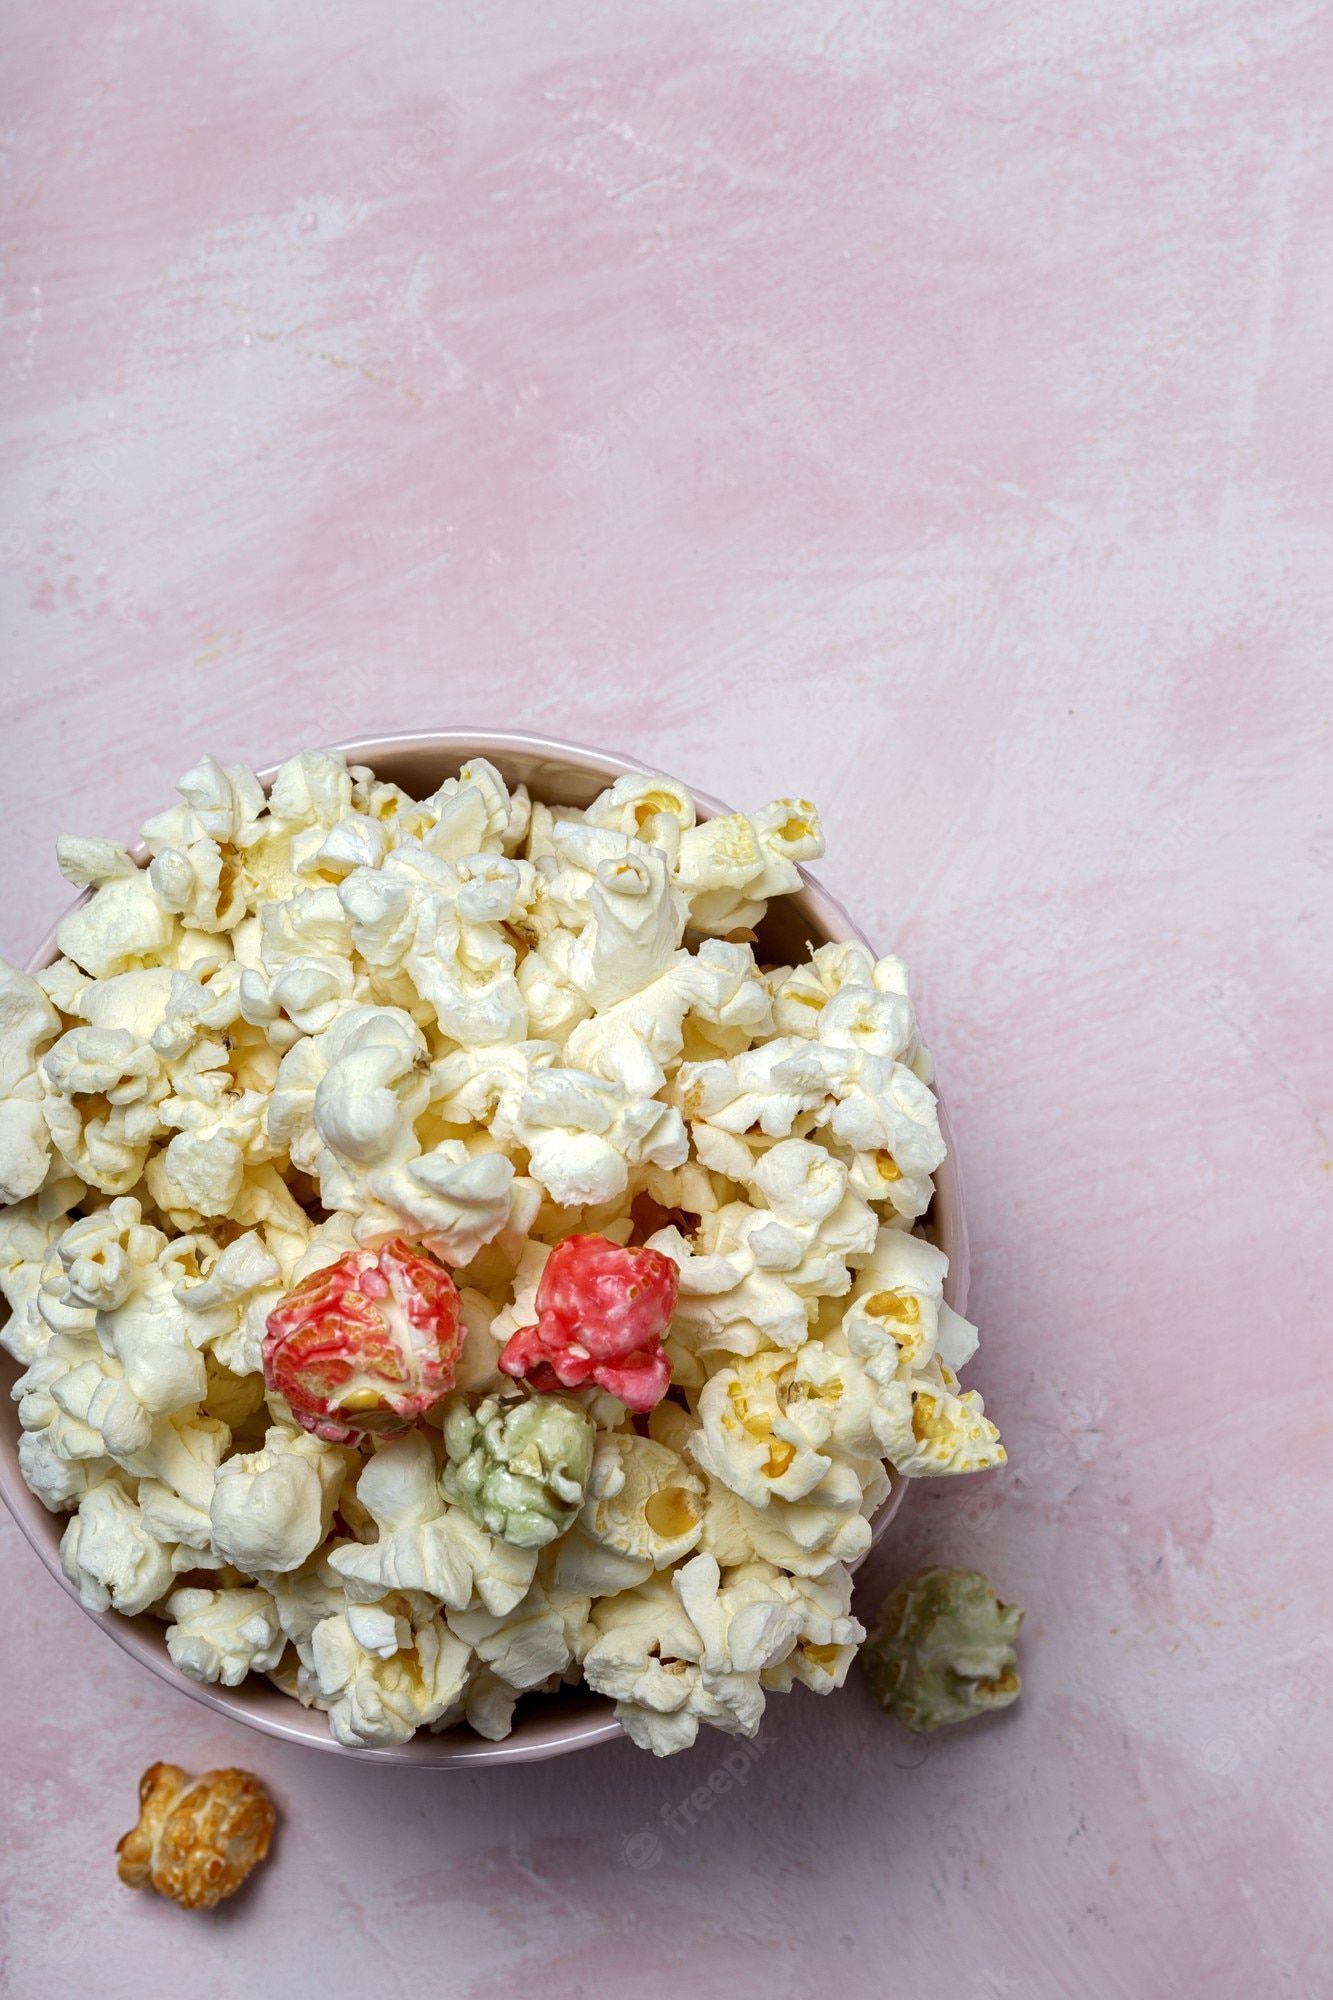 Premium Photo. Homemade popcorn on colored table with high contrast light. snack concept